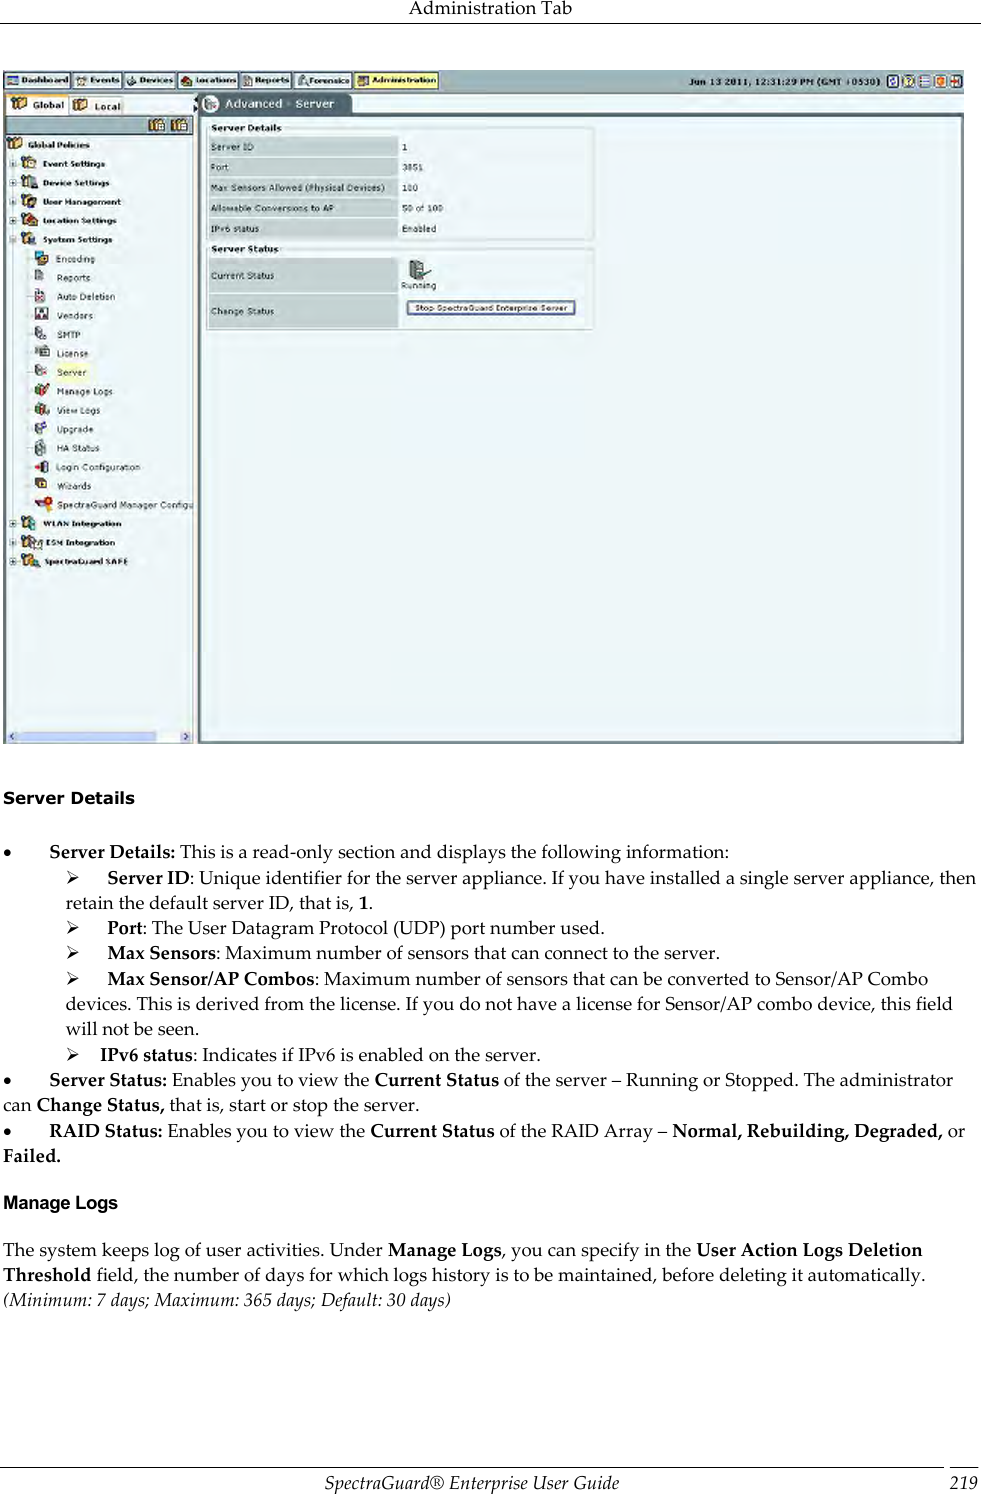 Administration Tab SpectraGuard®  Enterprise User Guide 219    Server Details             Server Details: This is a read-only section and displays the following information:        Server ID: Unique identifier for the server appliance. If you have installed a single server appliance, then retain the default server ID, that is, 1.        Port: The User Datagram Protocol (UDP) port number used.        Max Sensors: Maximum number of sensors that can connect to the server.        Max Sensor/AP Combos: Maximum number of sensors that can be converted to Sensor/AP Combo devices. This is derived from the license. If you do not have a license for Sensor/AP combo device, this field will not be seen.      IPv6 status: Indicates if IPv6 is enabled on the server.           Server Status: Enables you to view the Current Status of the server – Running or Stopped. The administrator can Change Status, that is, start or stop the server.           RAID Status: Enables you to view the Current Status of the RAID Array – Normal, Rebuilding, Degraded, or Failed. Manage Logs The system keeps log of user activities. Under Manage Logs, you can specify in the User Action Logs Deletion Threshold field, the number of days for which logs history is to be maintained, before deleting it automatically. (Minimum: 7 days; Maximum: 365 days; Default: 30 days) 